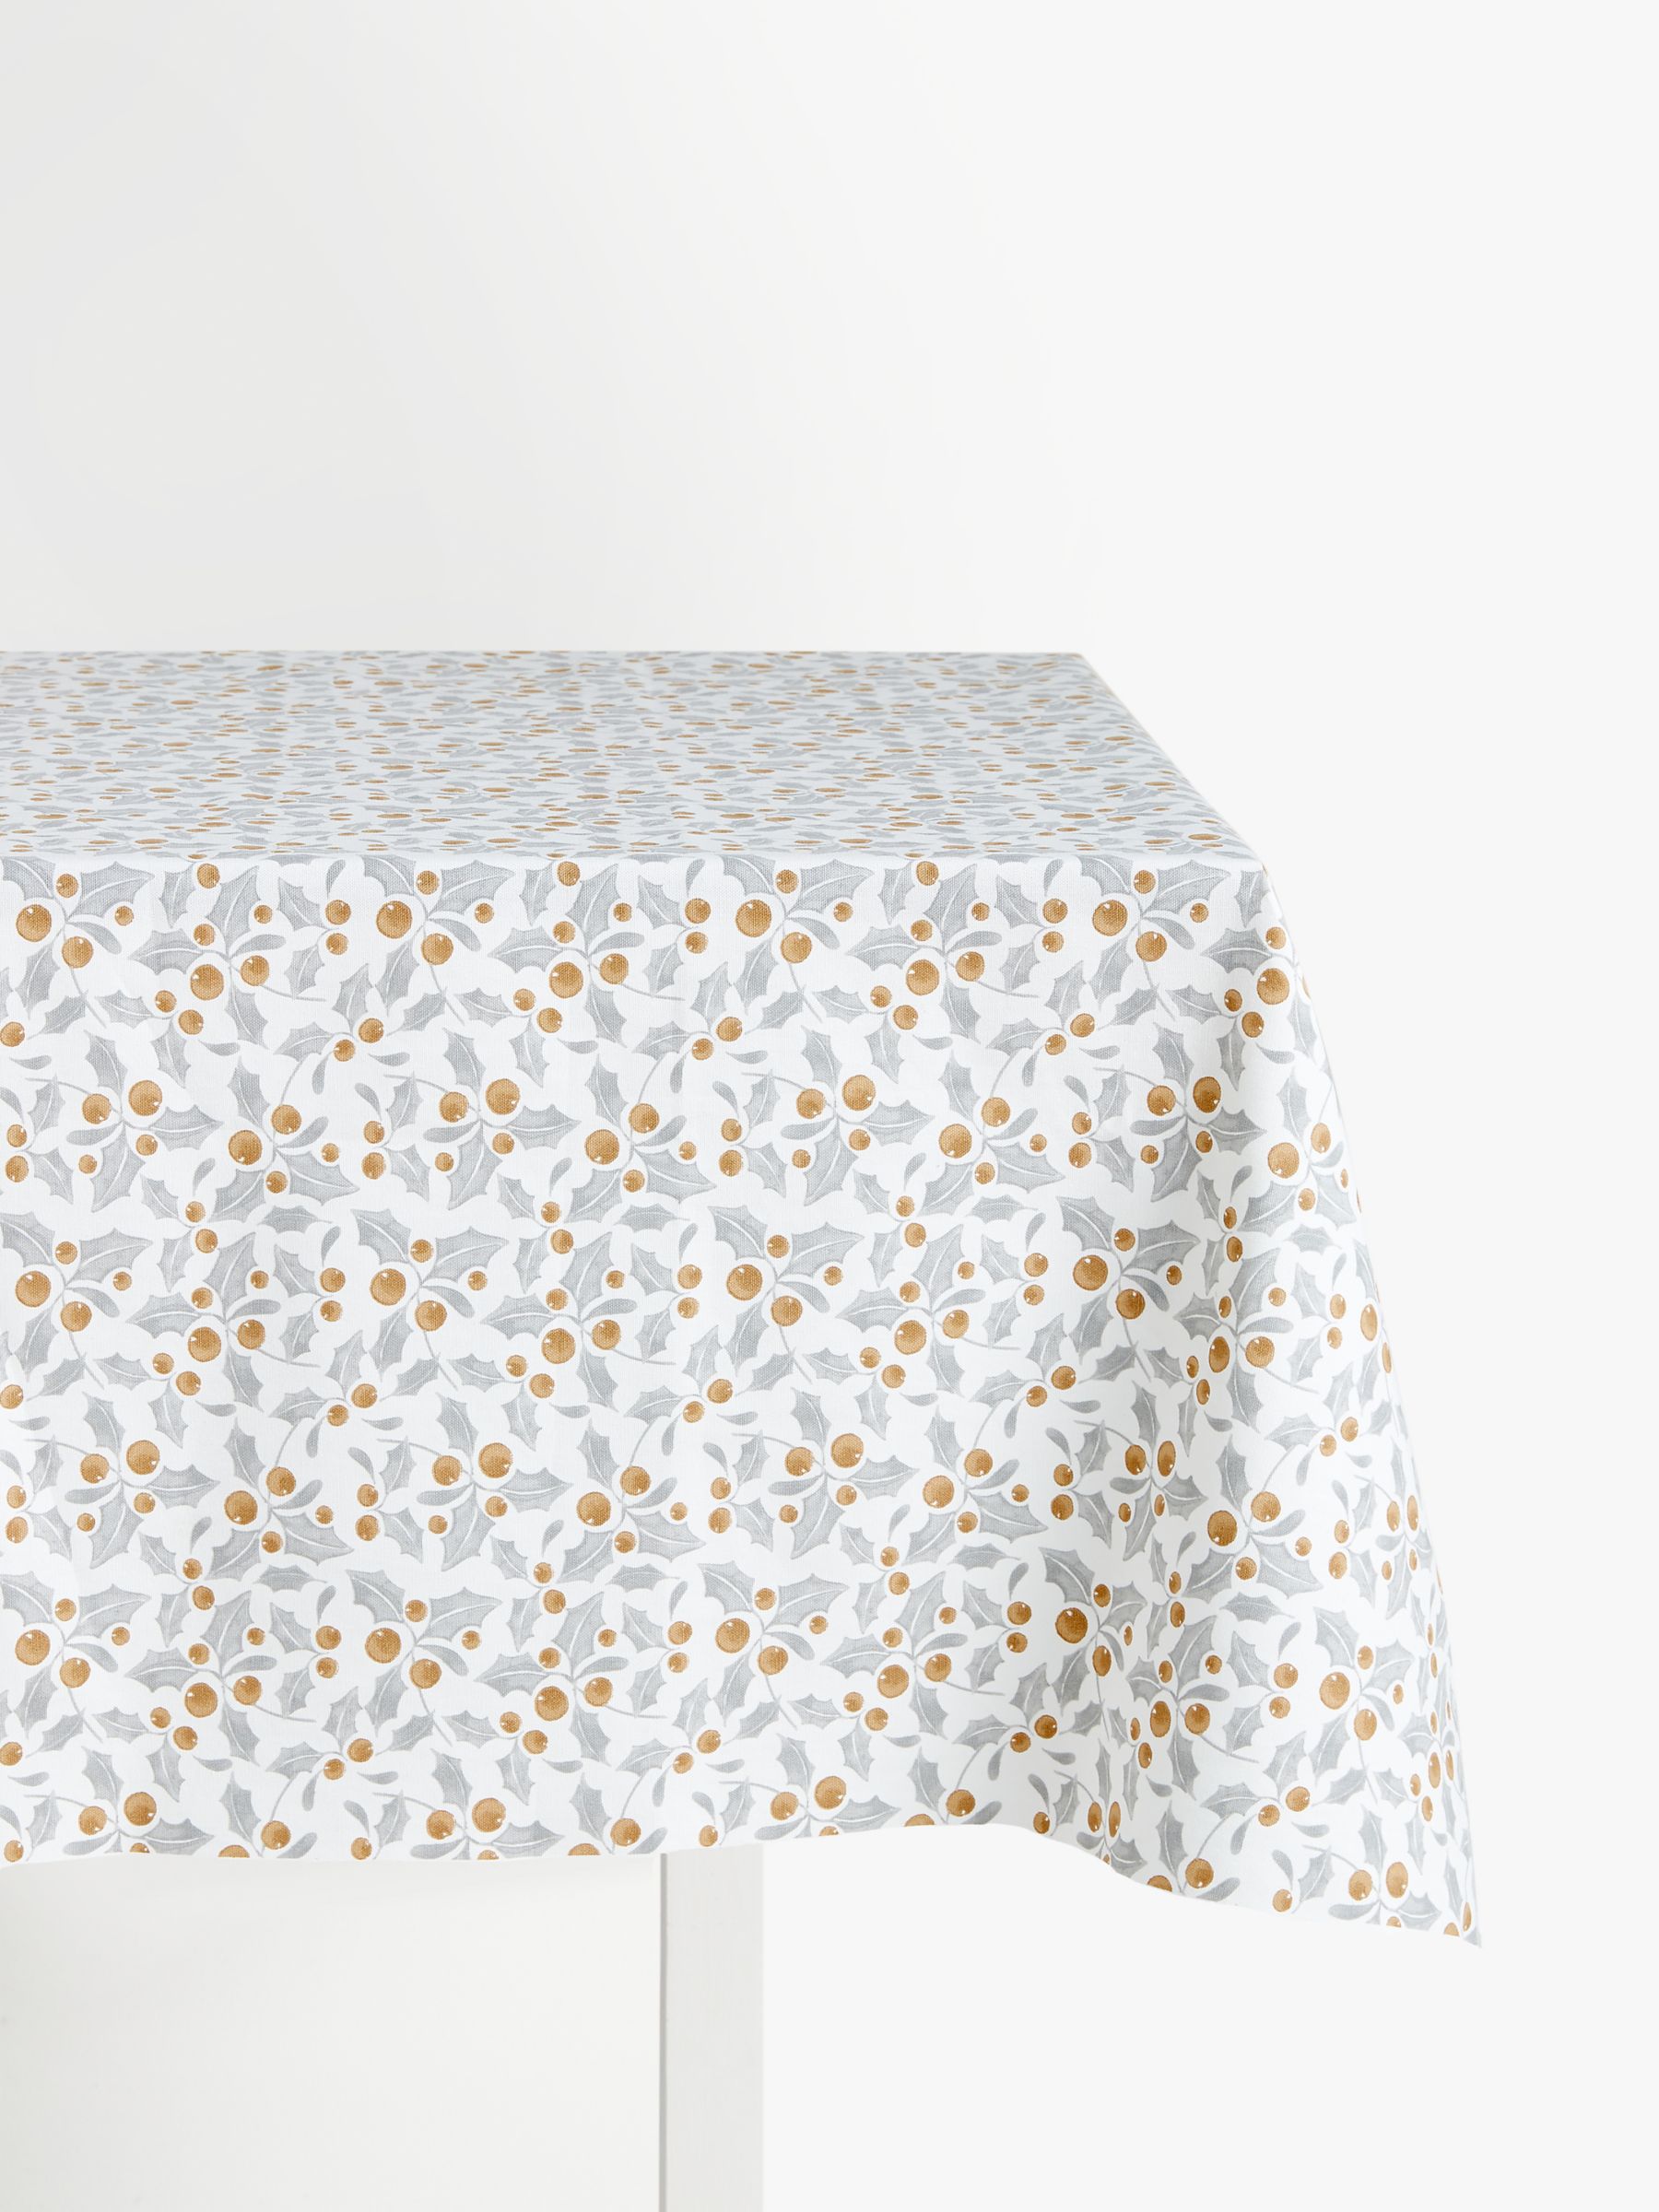 John Lewis Classic Holly PVC Tablecloth Fabric, Silver/Gold